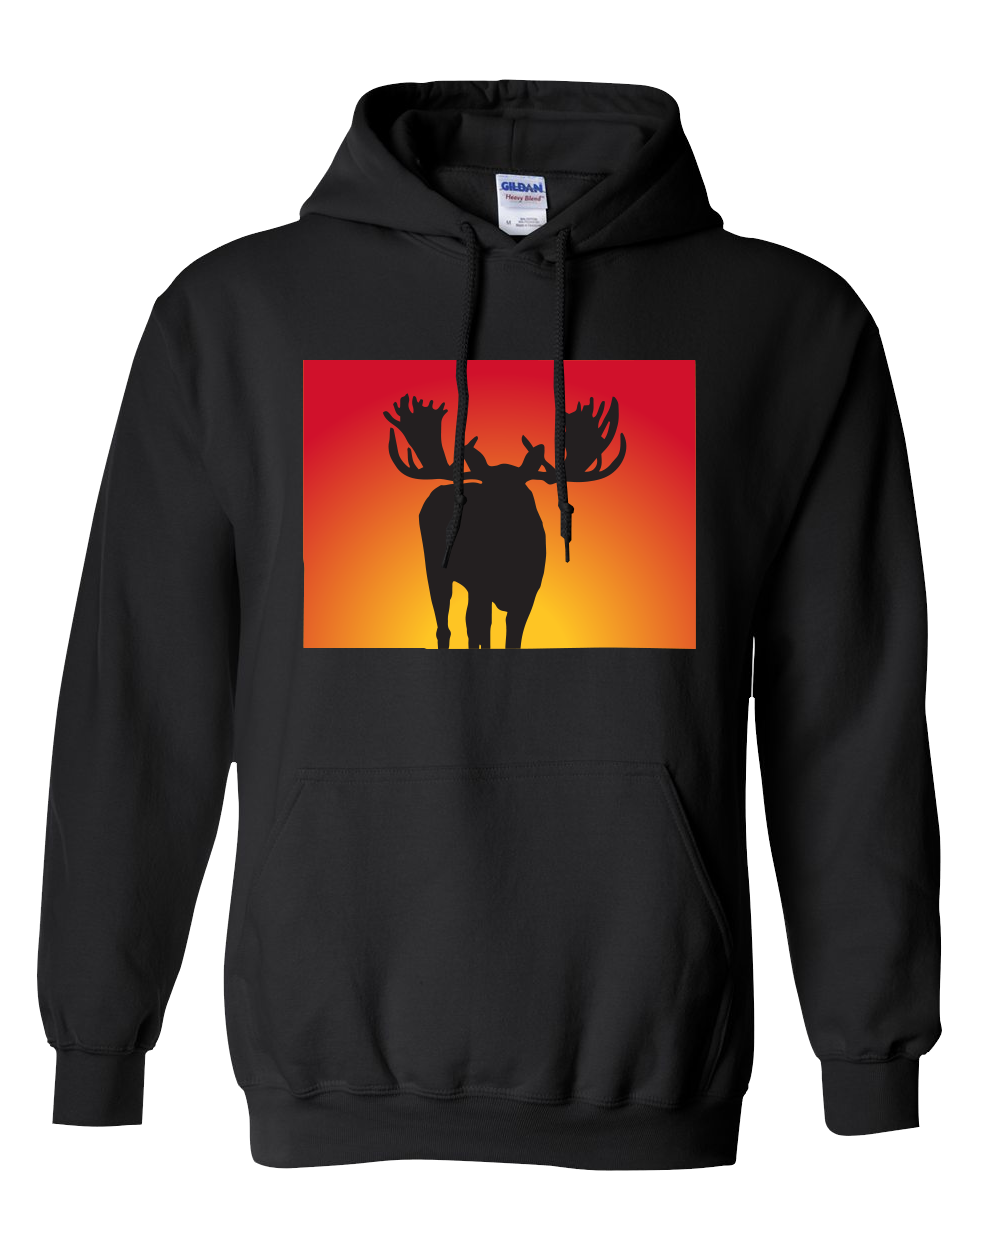 Pullover Hooded Sweatshirt Colorado Black Moose Vibrant Design High Quality Tight Knit Ring Spun Low Maintenance Cotton Printed With The Newest Available Color Transfer Technology